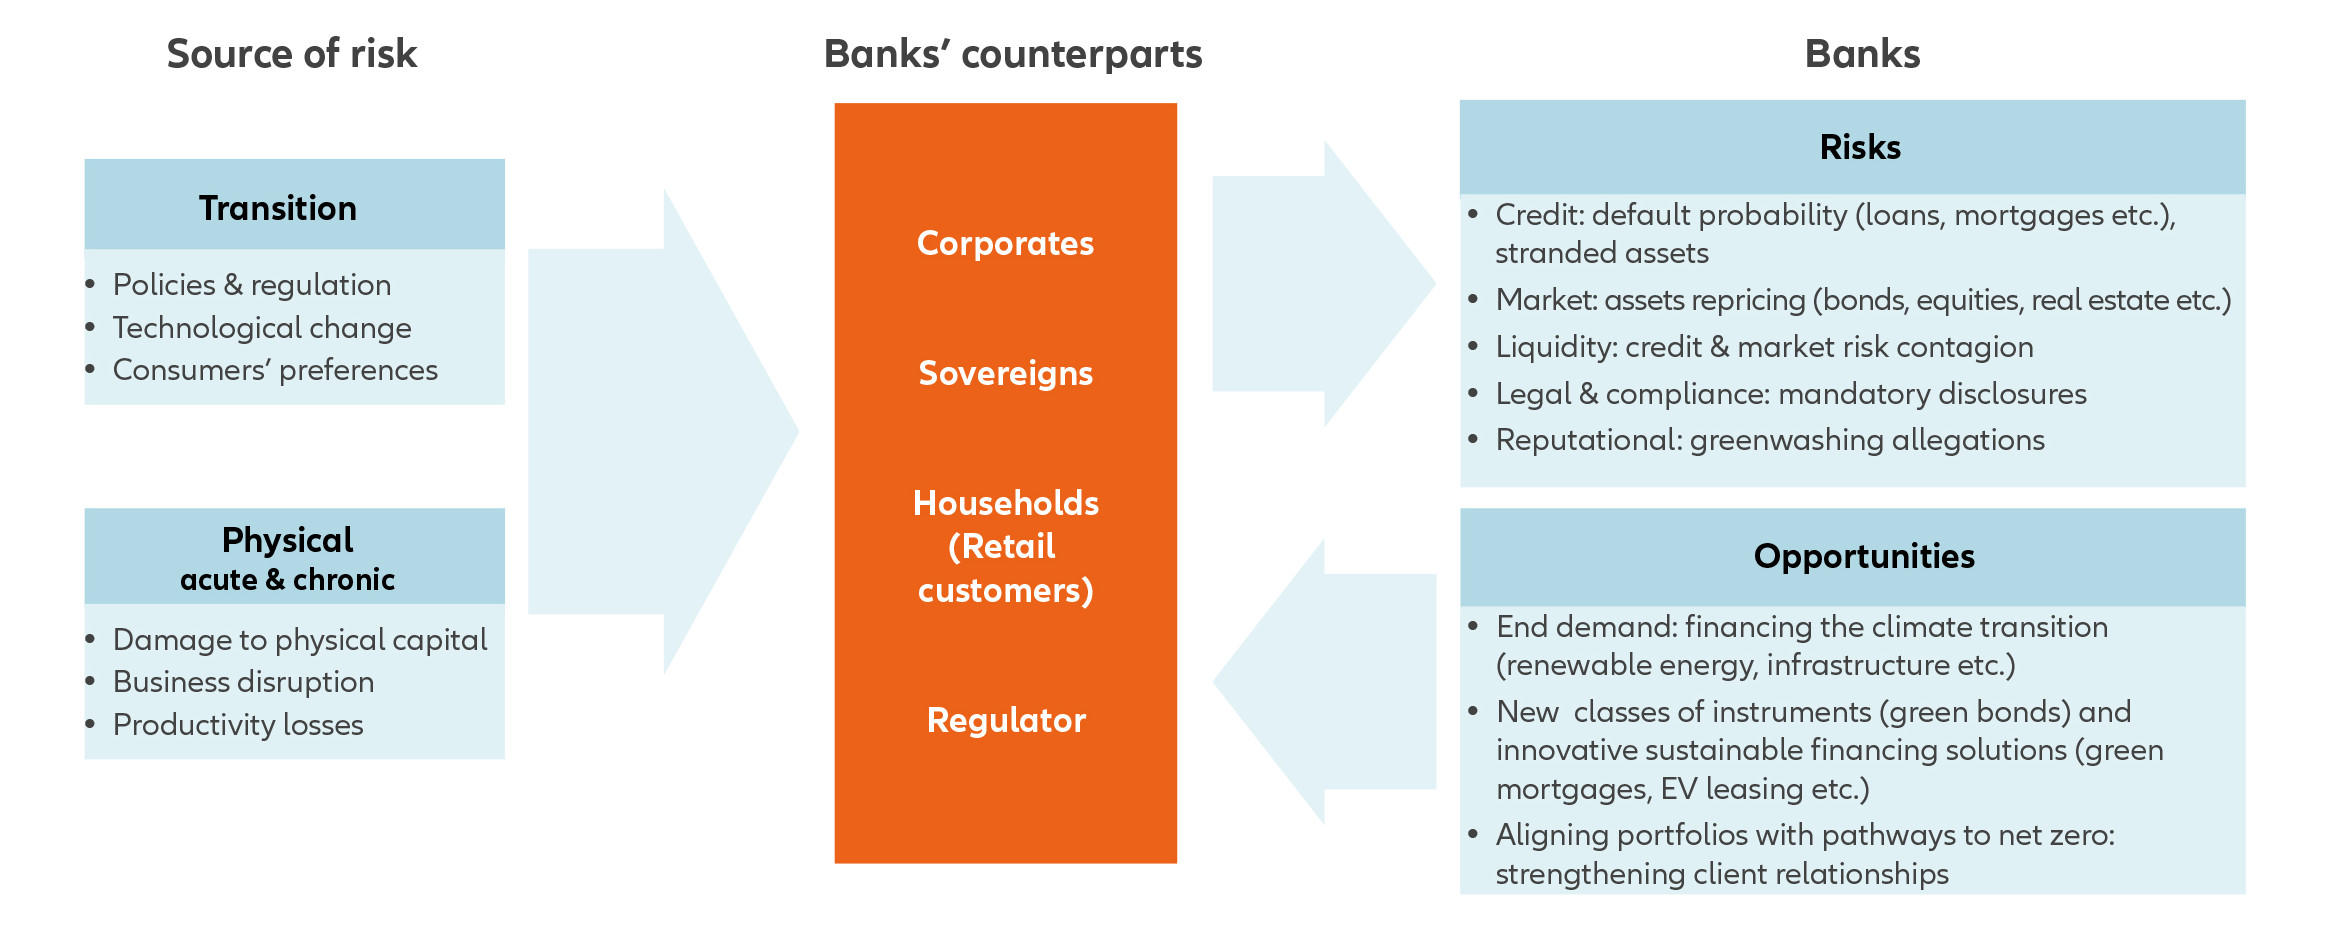 Exhibit 2: Climate-related risks and opportunities for banks